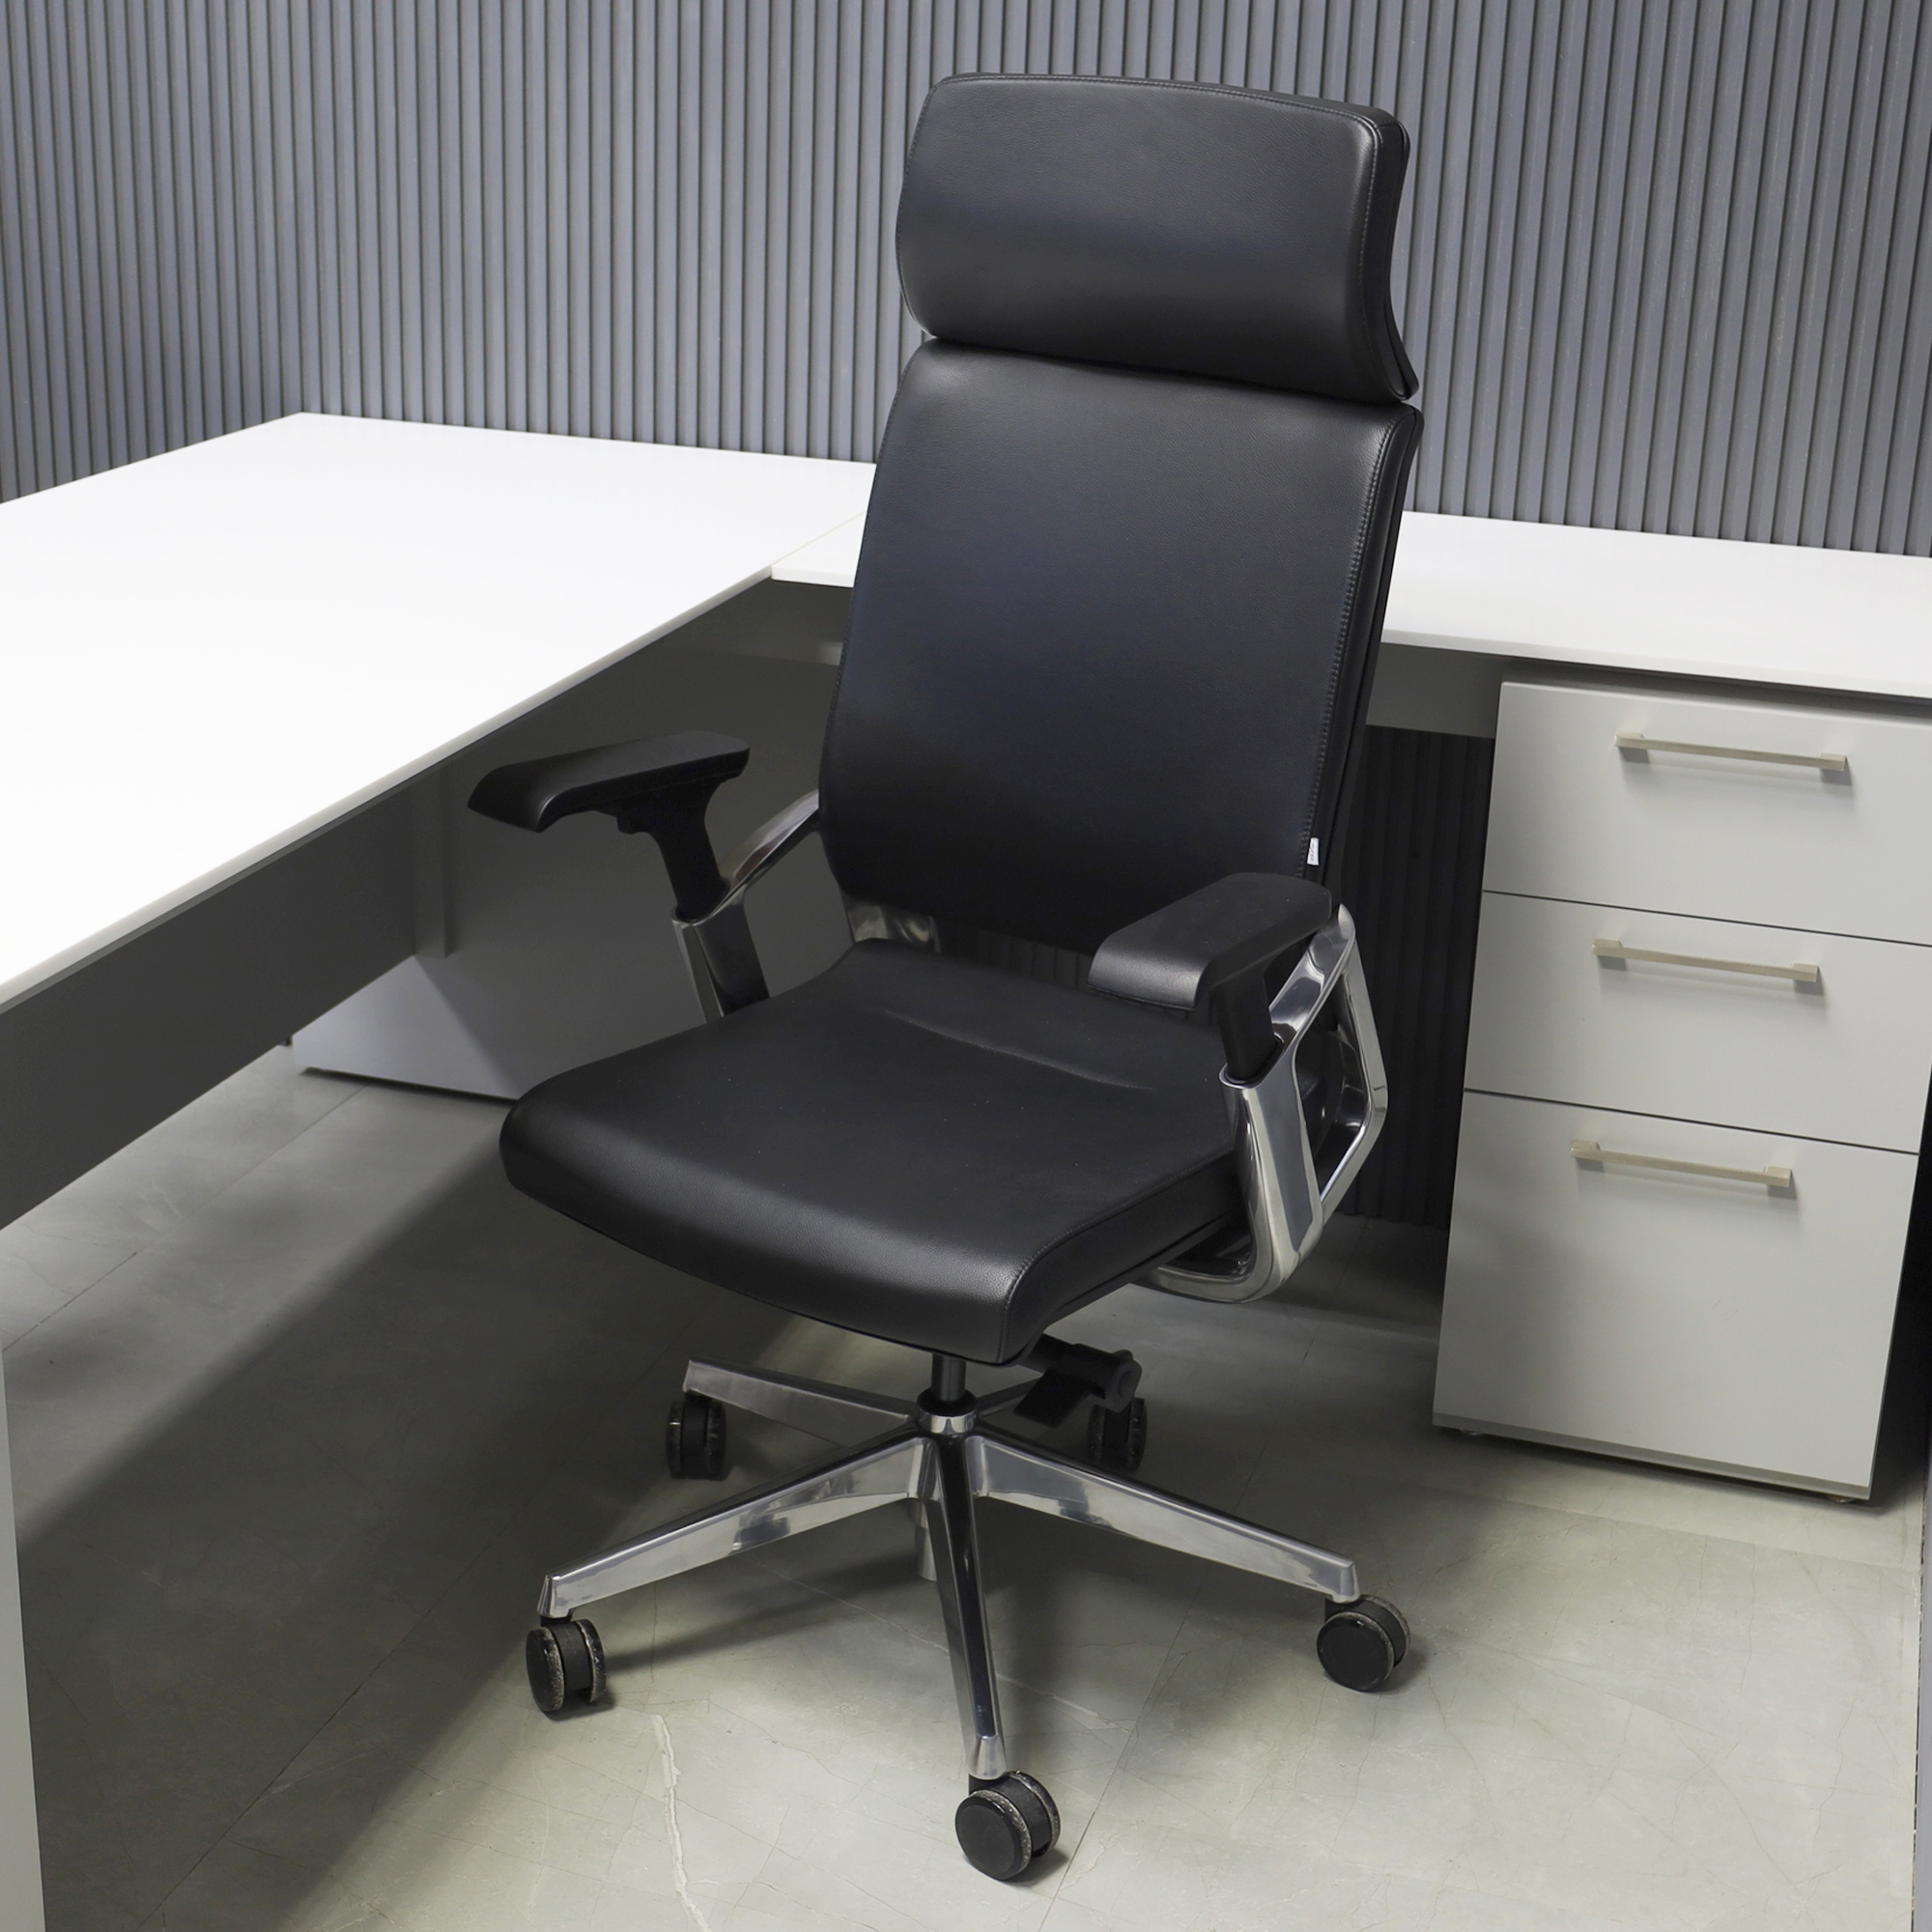 Visanti Executive Chair in top black grain leather, shown here.